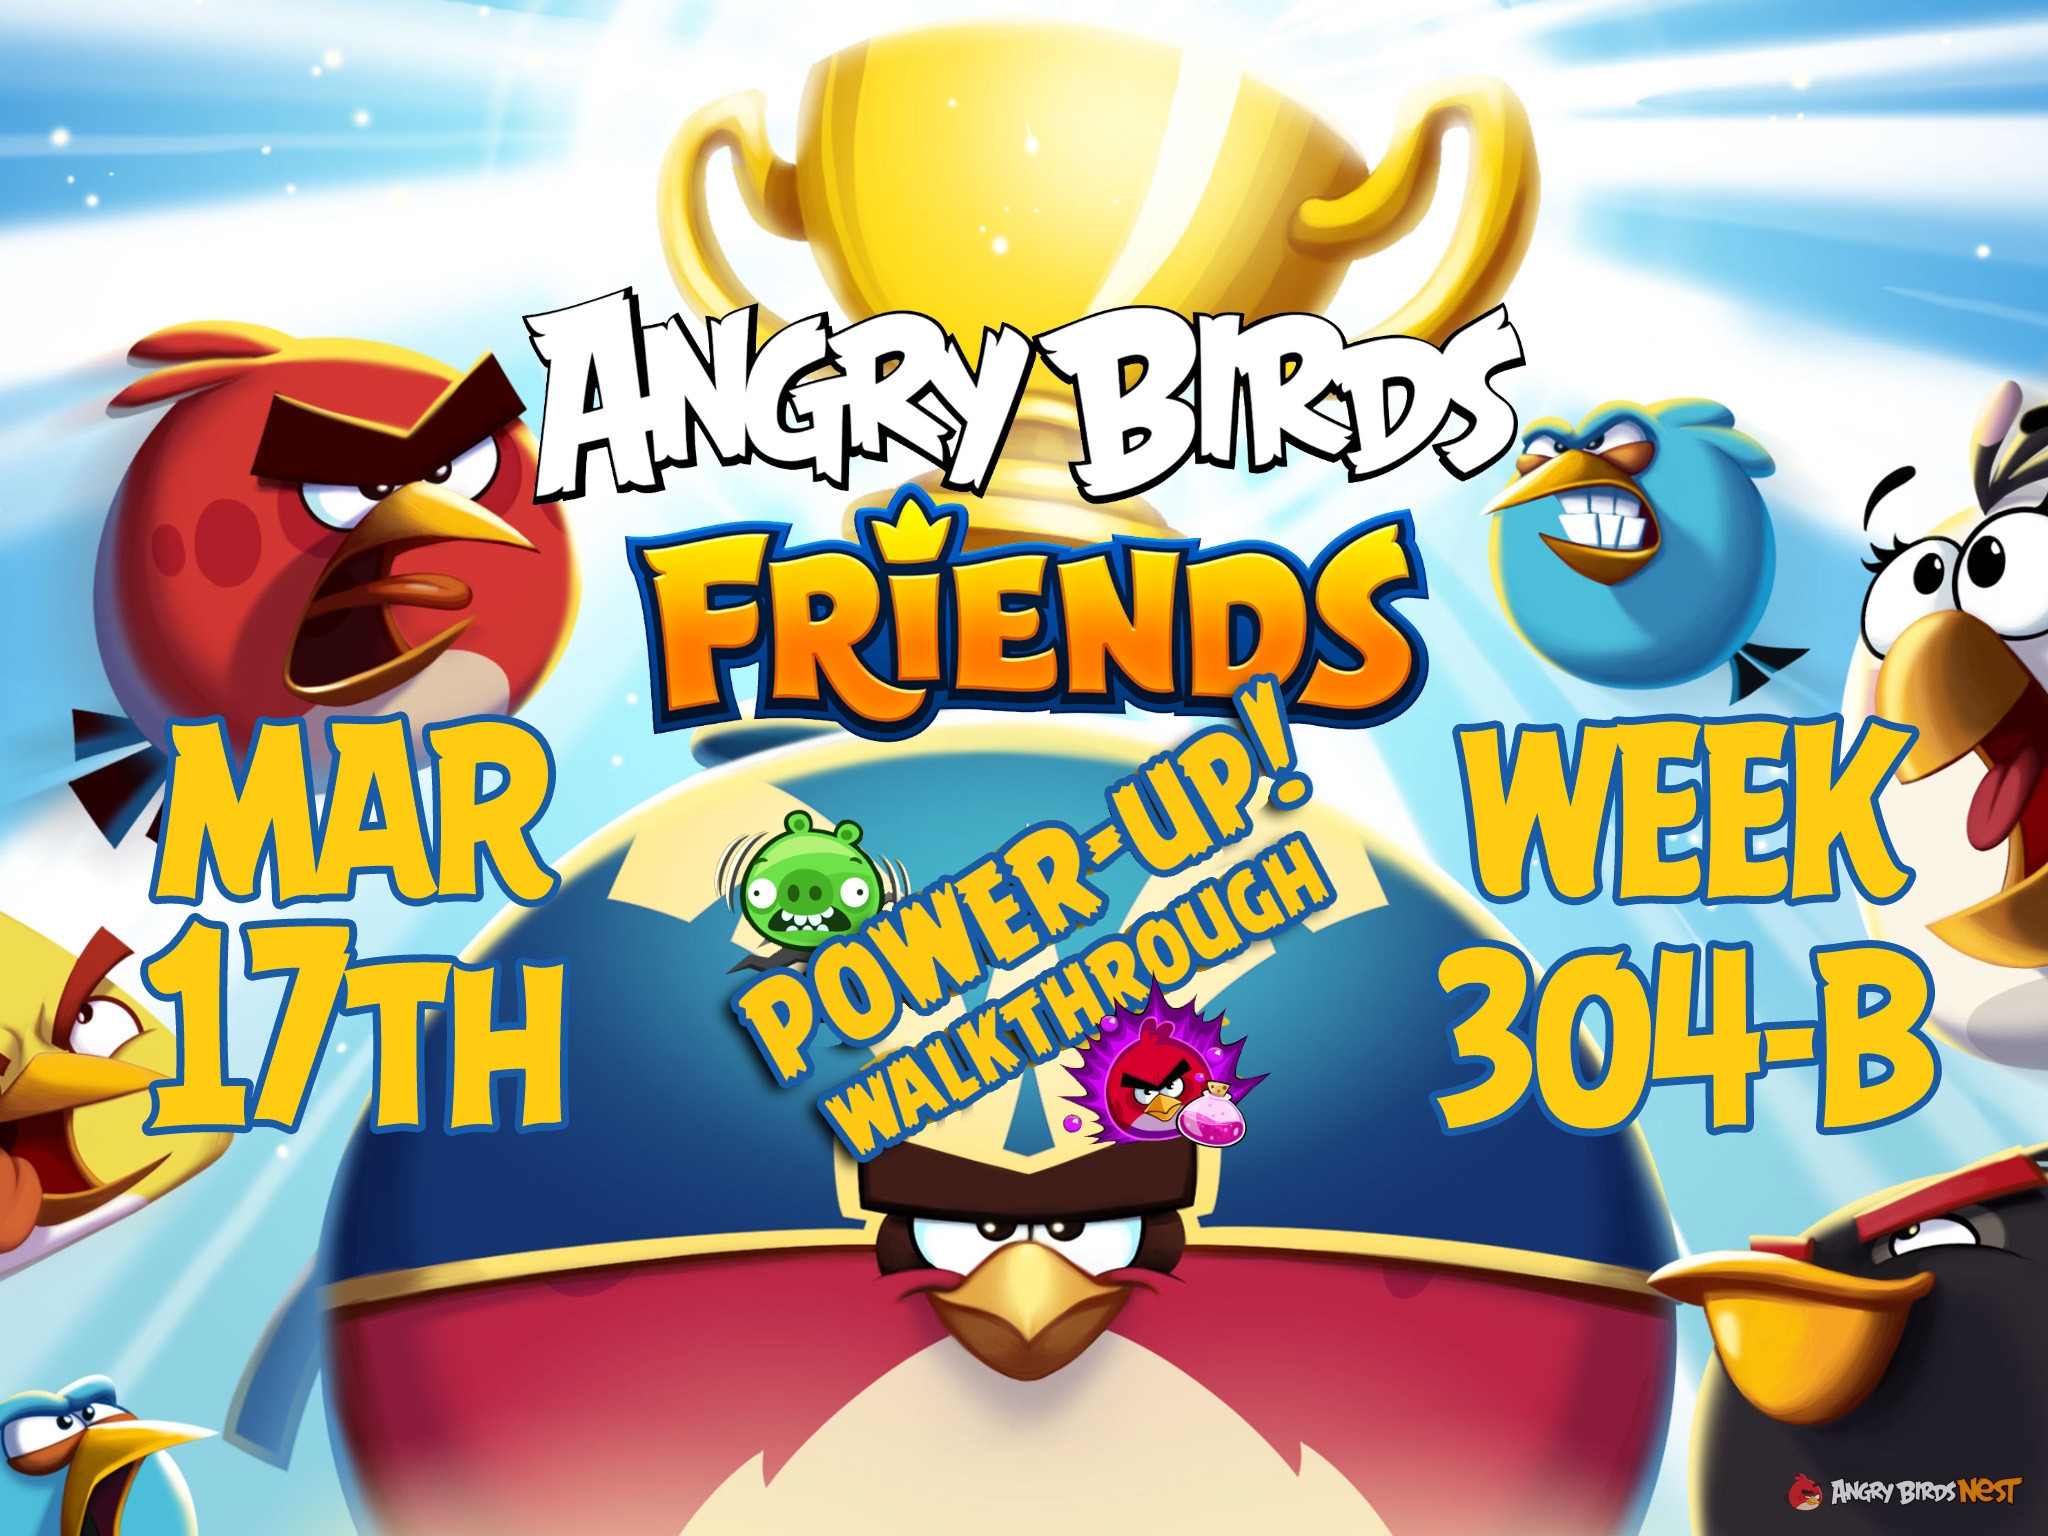 Angry Birds Friends Tournament Week 304-B Feature Image PU